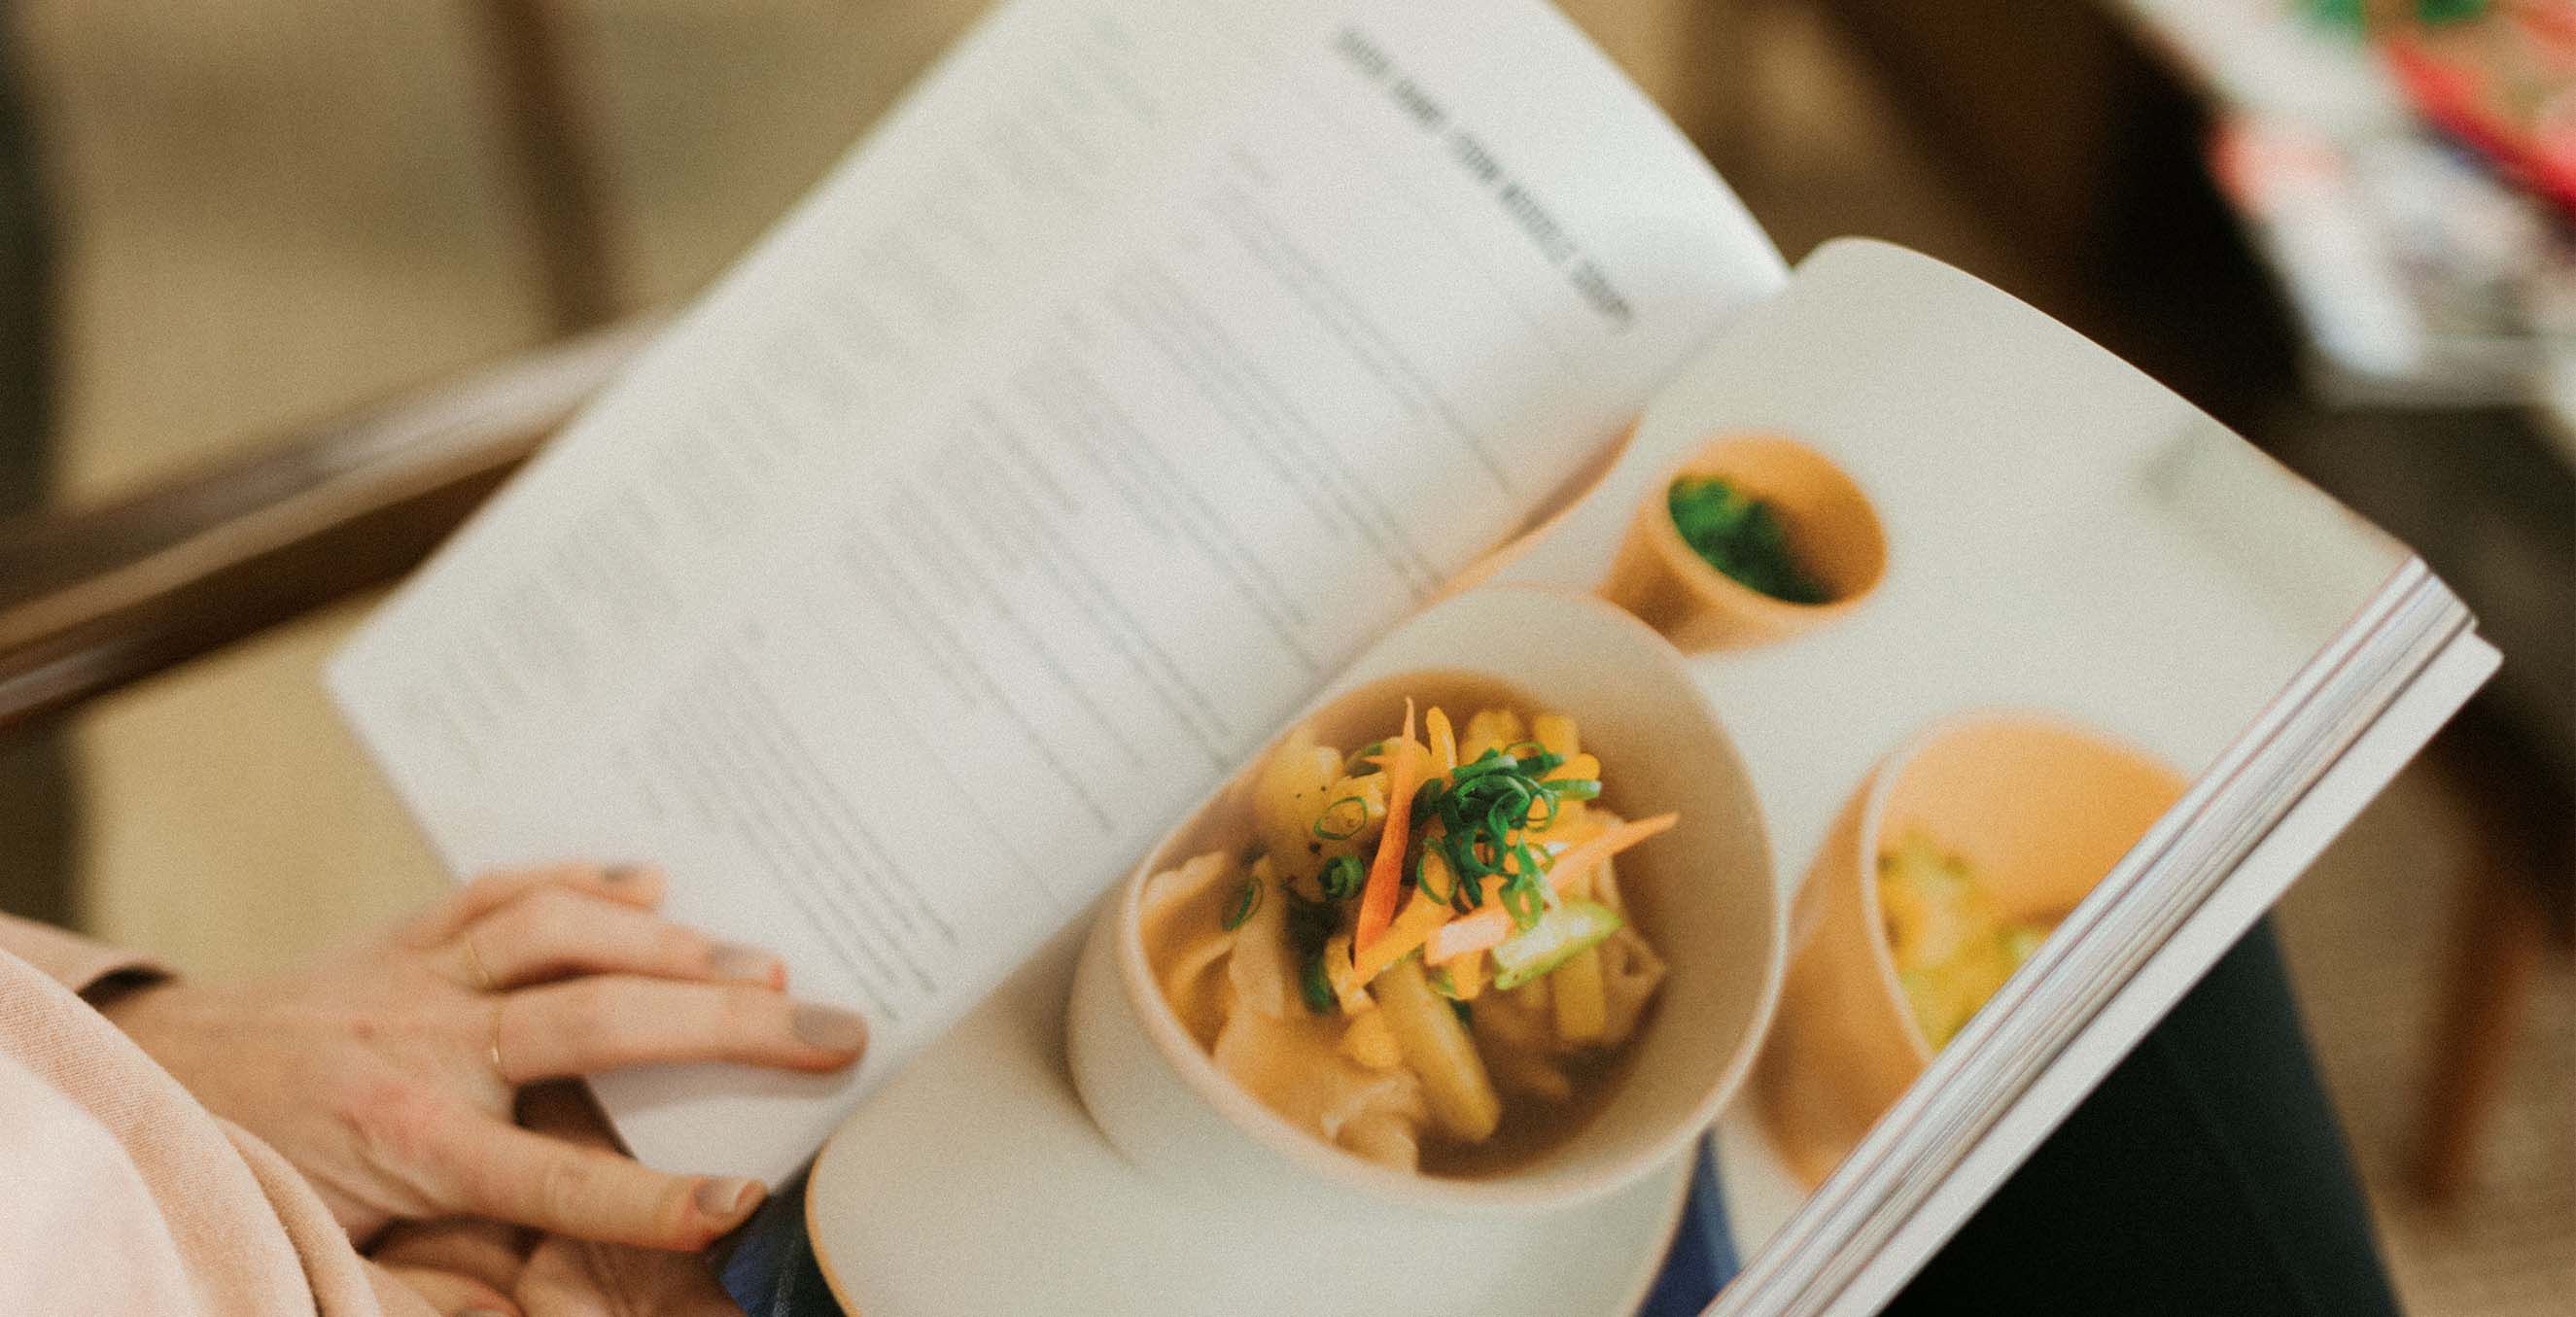 Across LSW and Riff, team members shared the recipes (and stories) that are close to their hearts in their first cookbook, 'Better Together', .